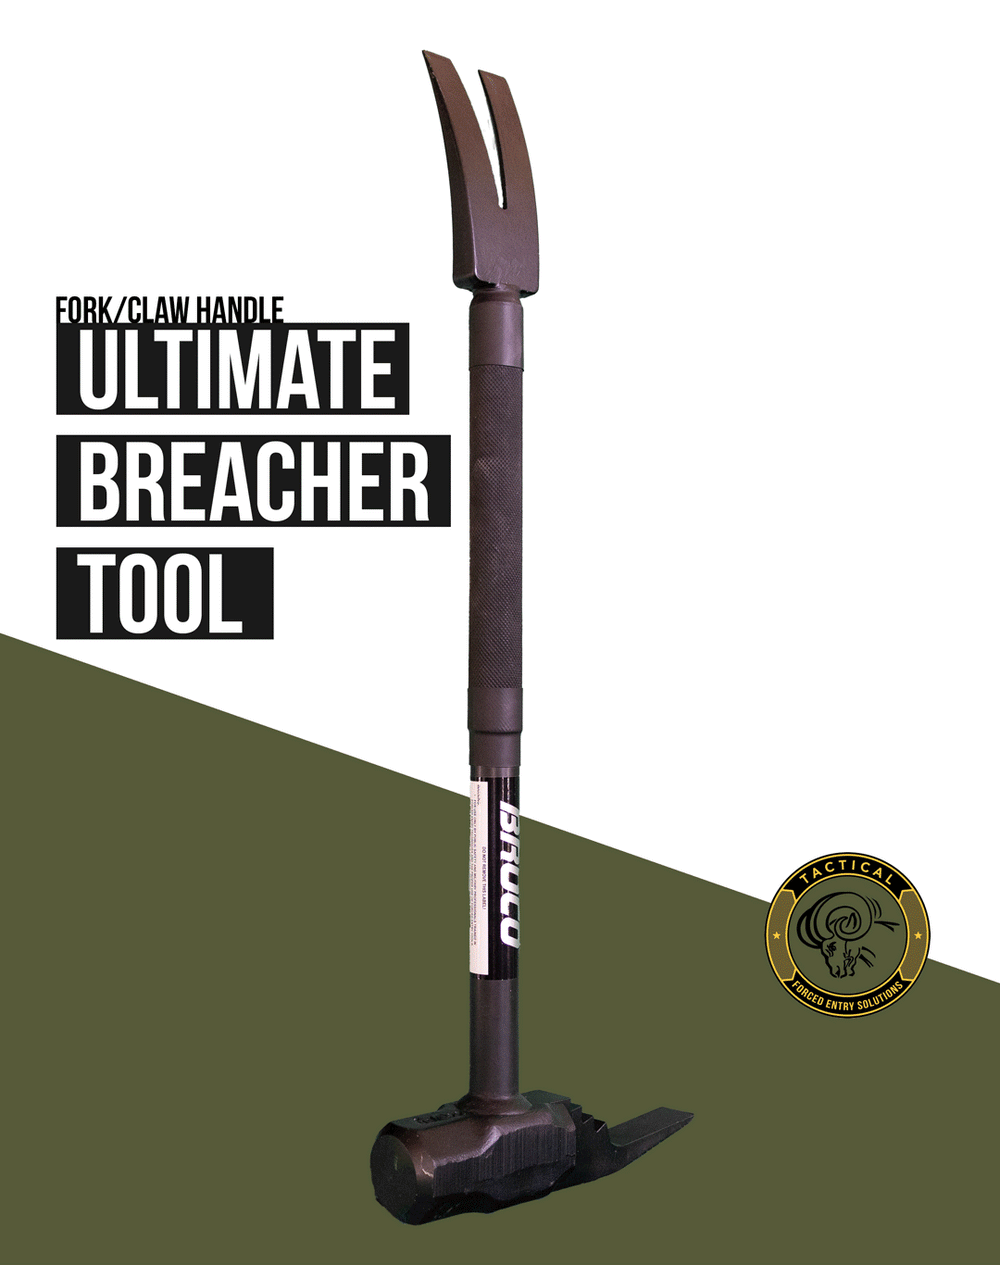 UBT Ultimate Breacher Tool with Fork/Claw